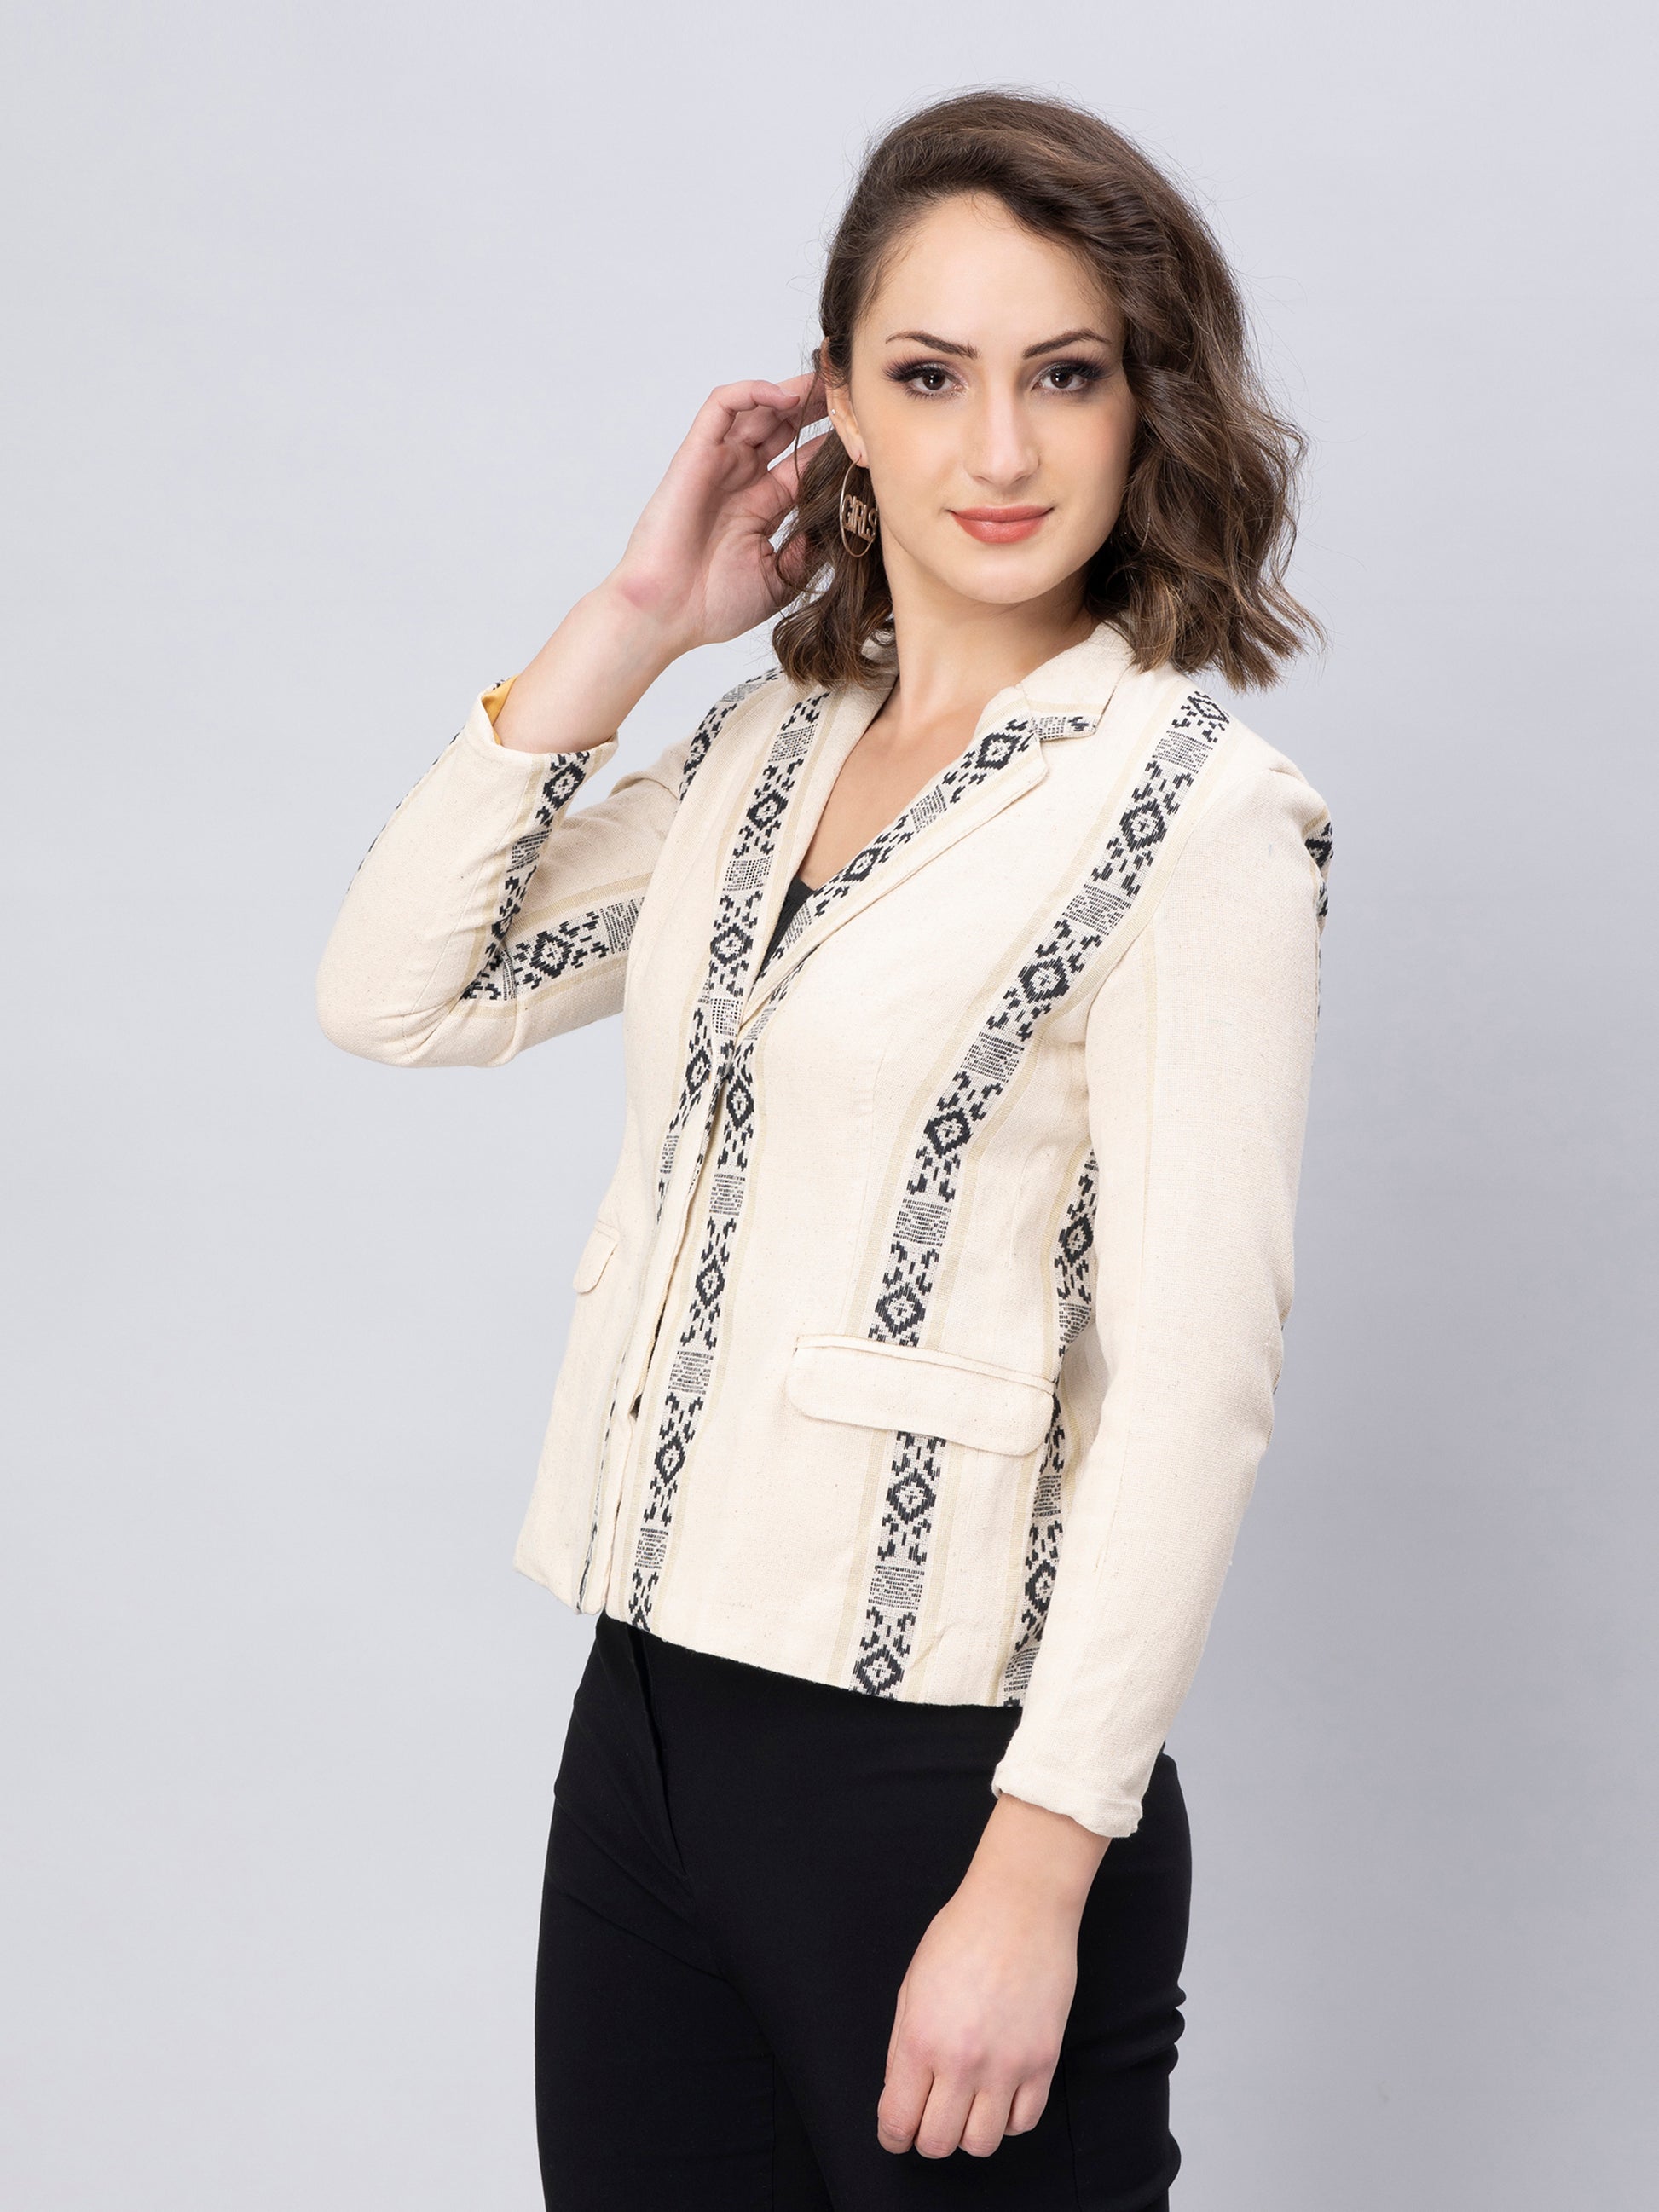 A Women in Elegant Black And White Blazer In Jute Cotton, womens workwear standing against a grey background